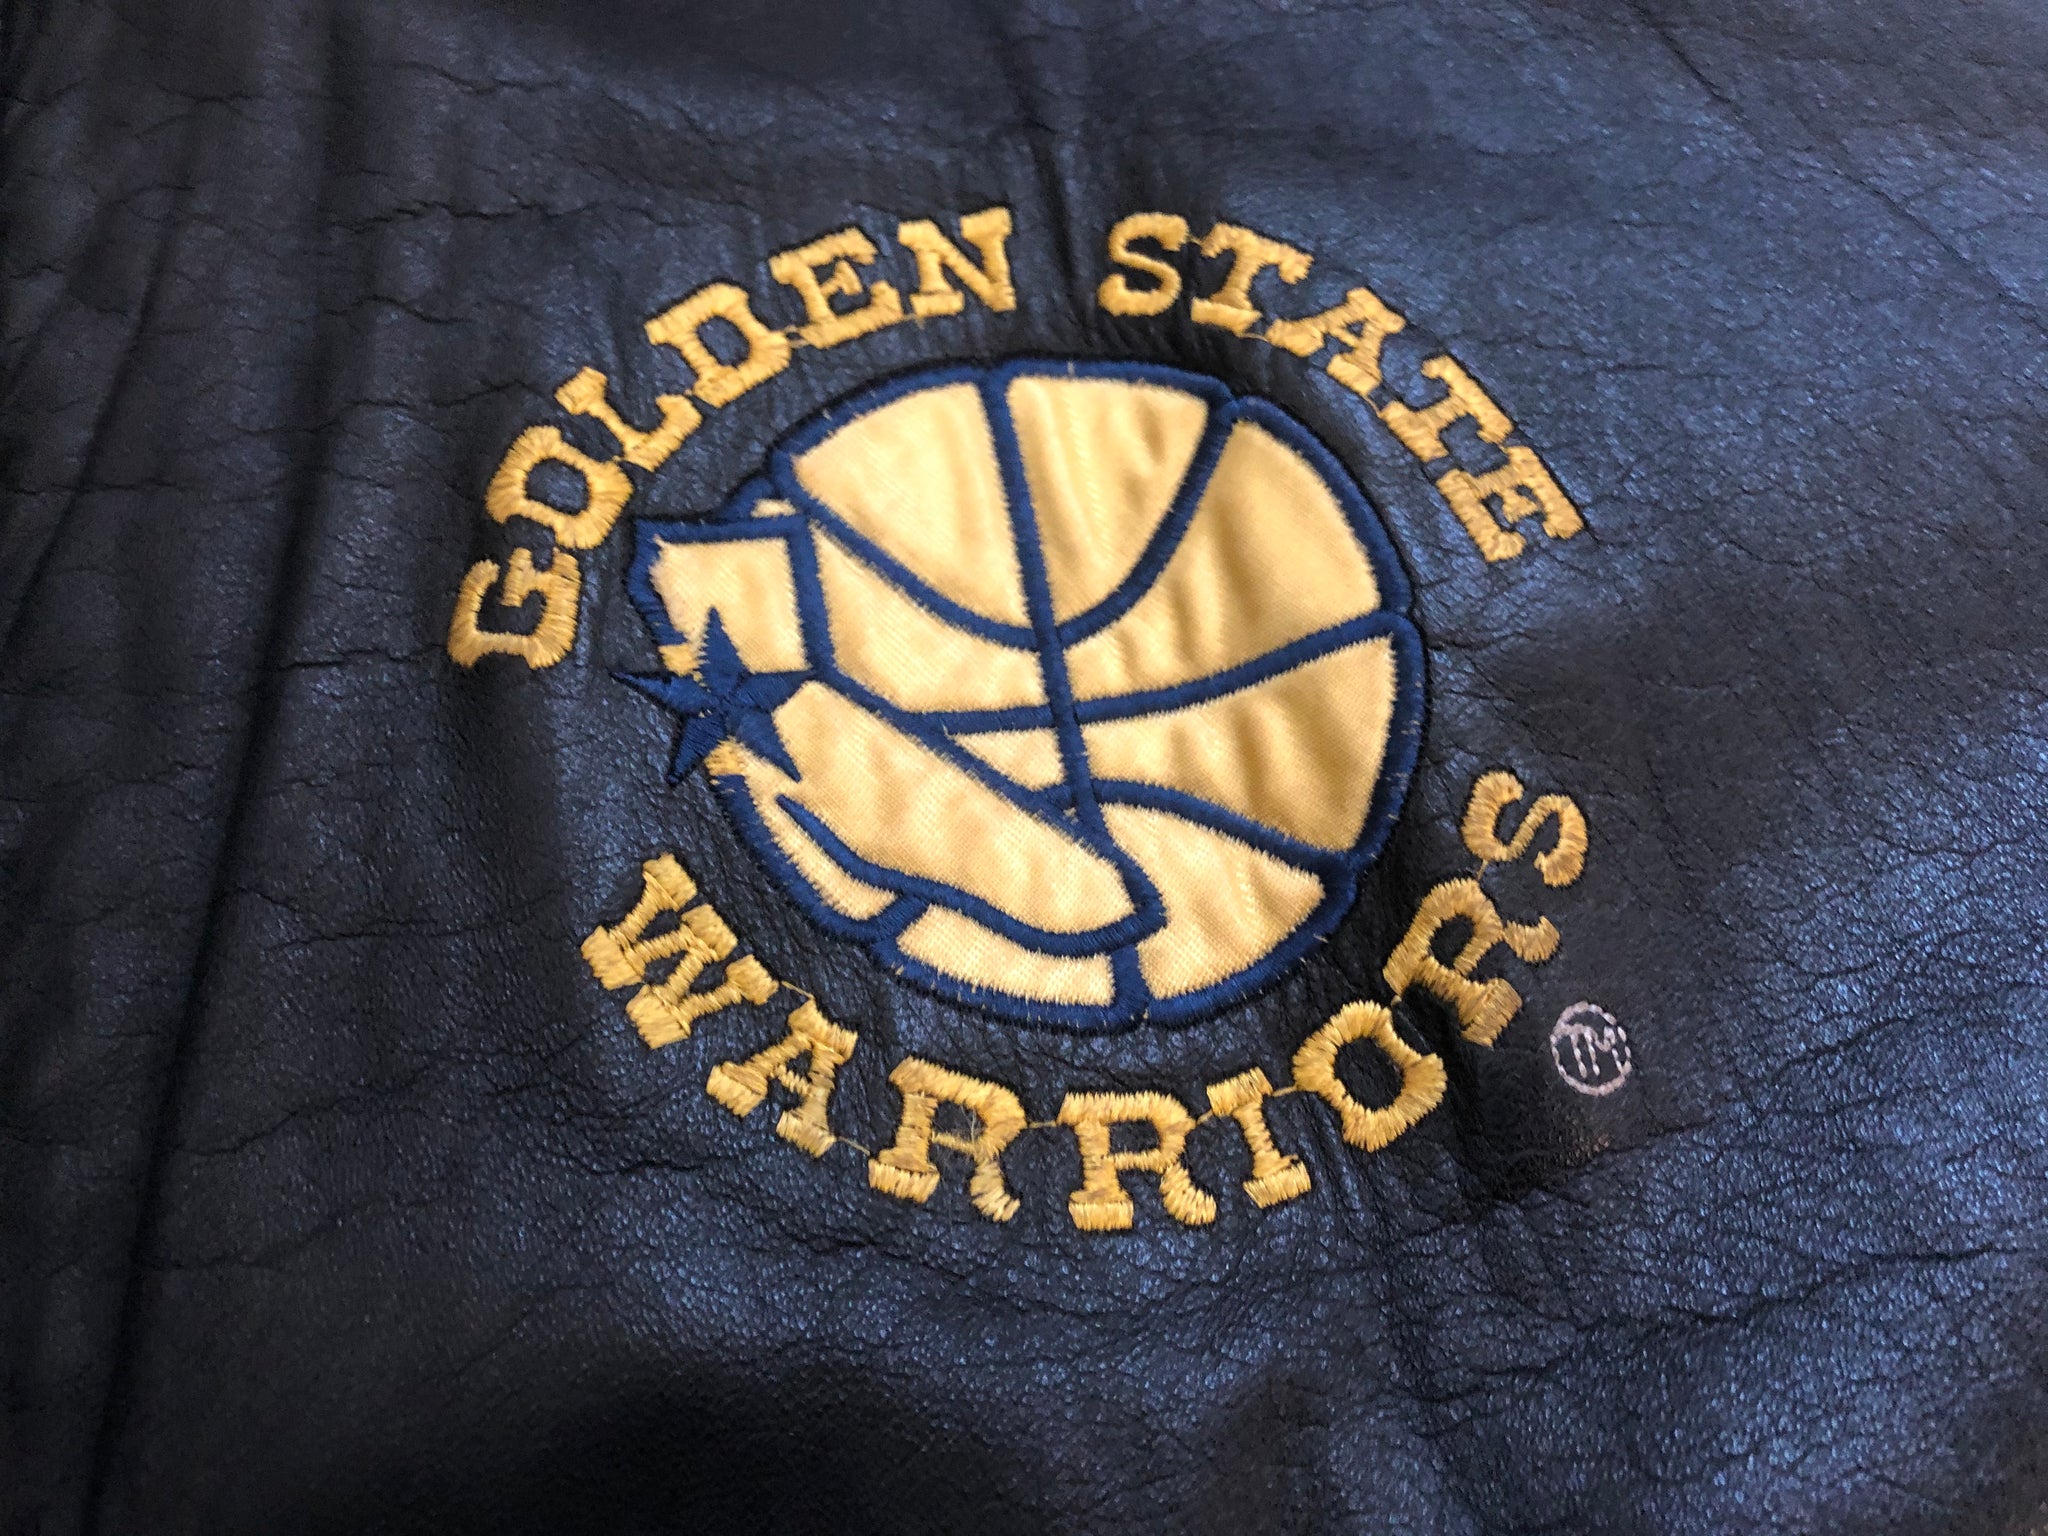 XL - Vintage NBA Golden State Warriors Pro Player Jacket – Twisted